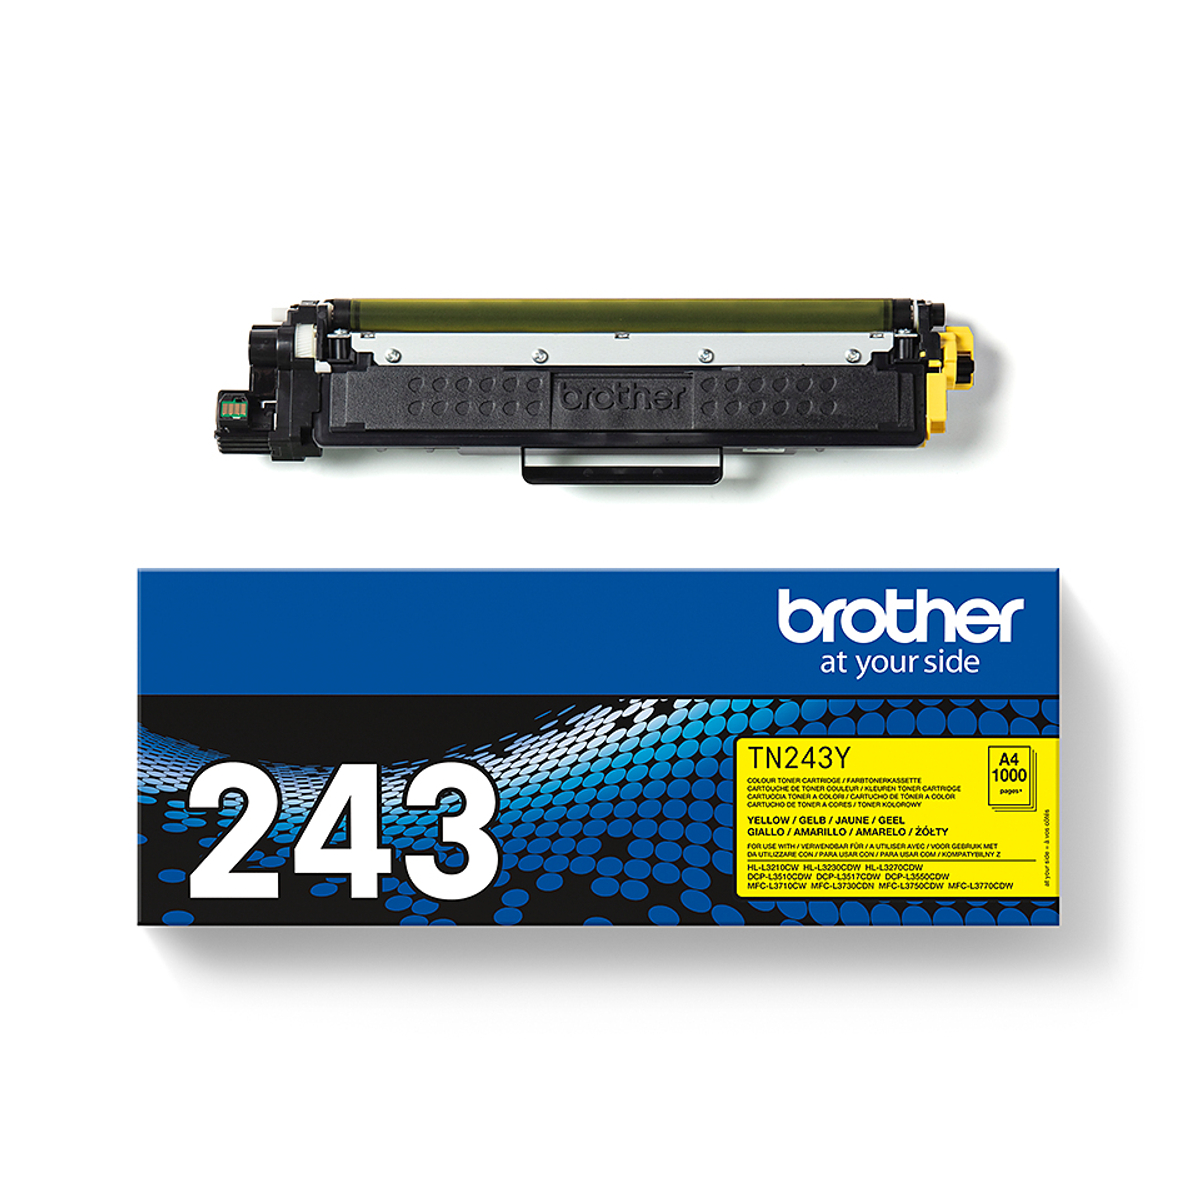 TN243Y Yellow 1k Pages Toner